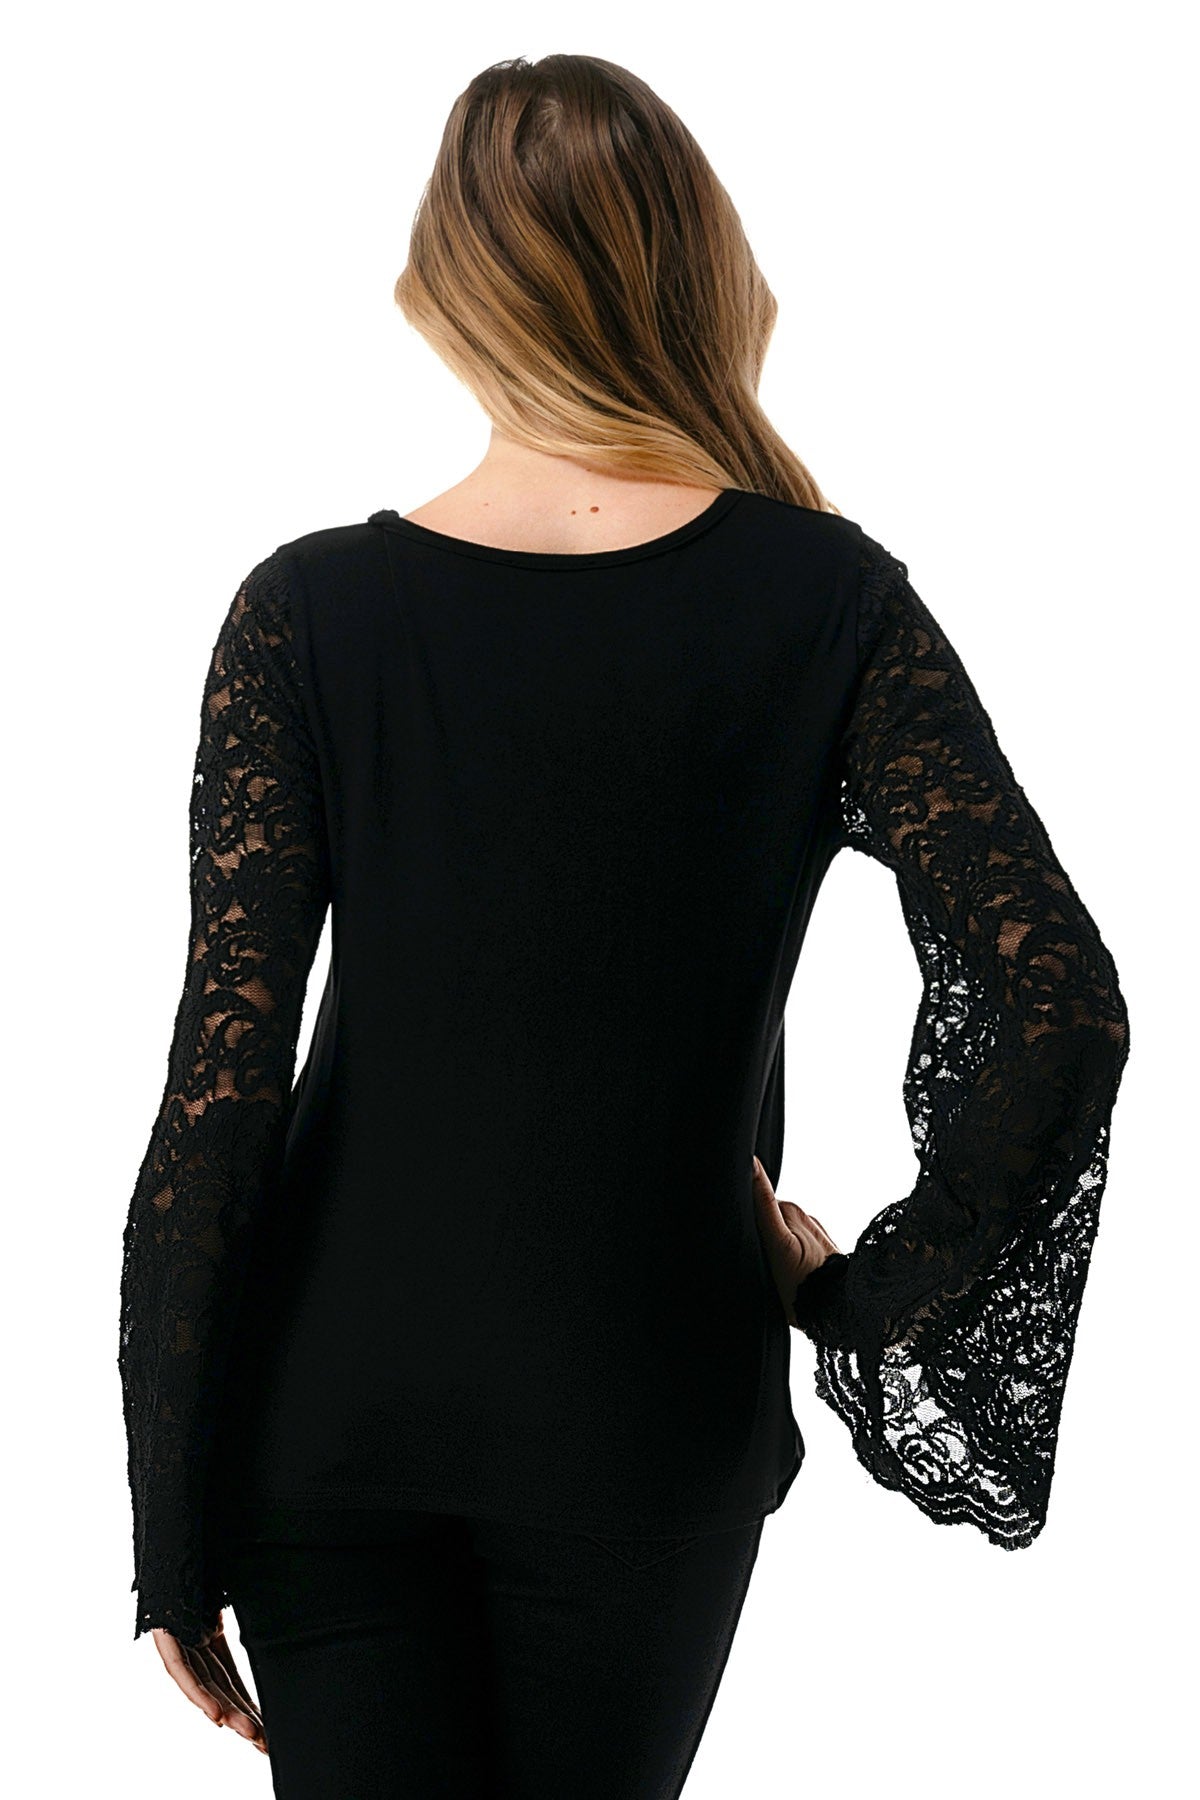 Black Surplice Top With Lace Sleeves